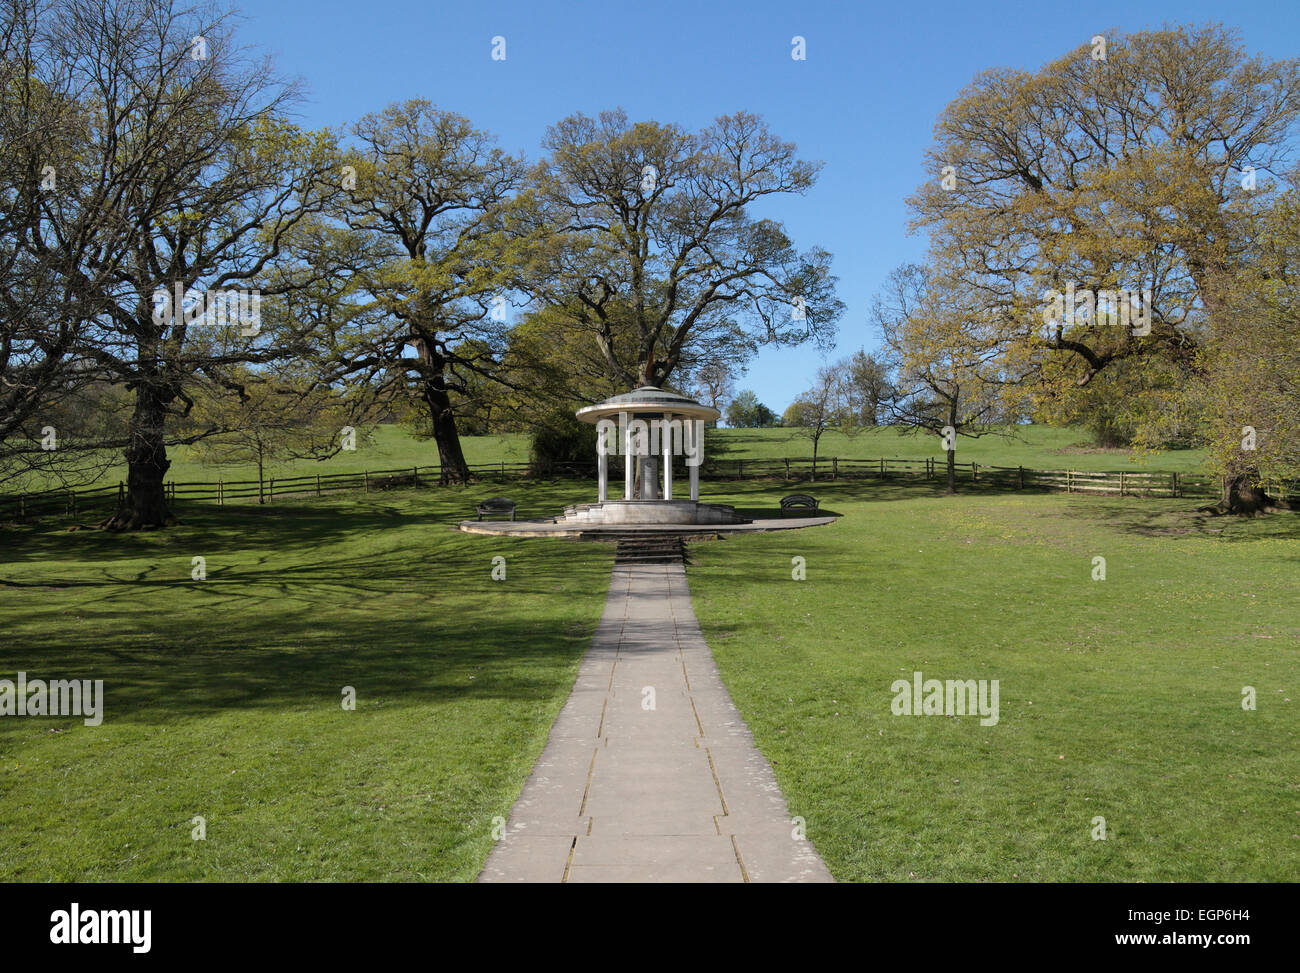 The Magna Carta Memorial in Runnymede commemorating the signing of the Magna Carta in 1215. Stock Photo